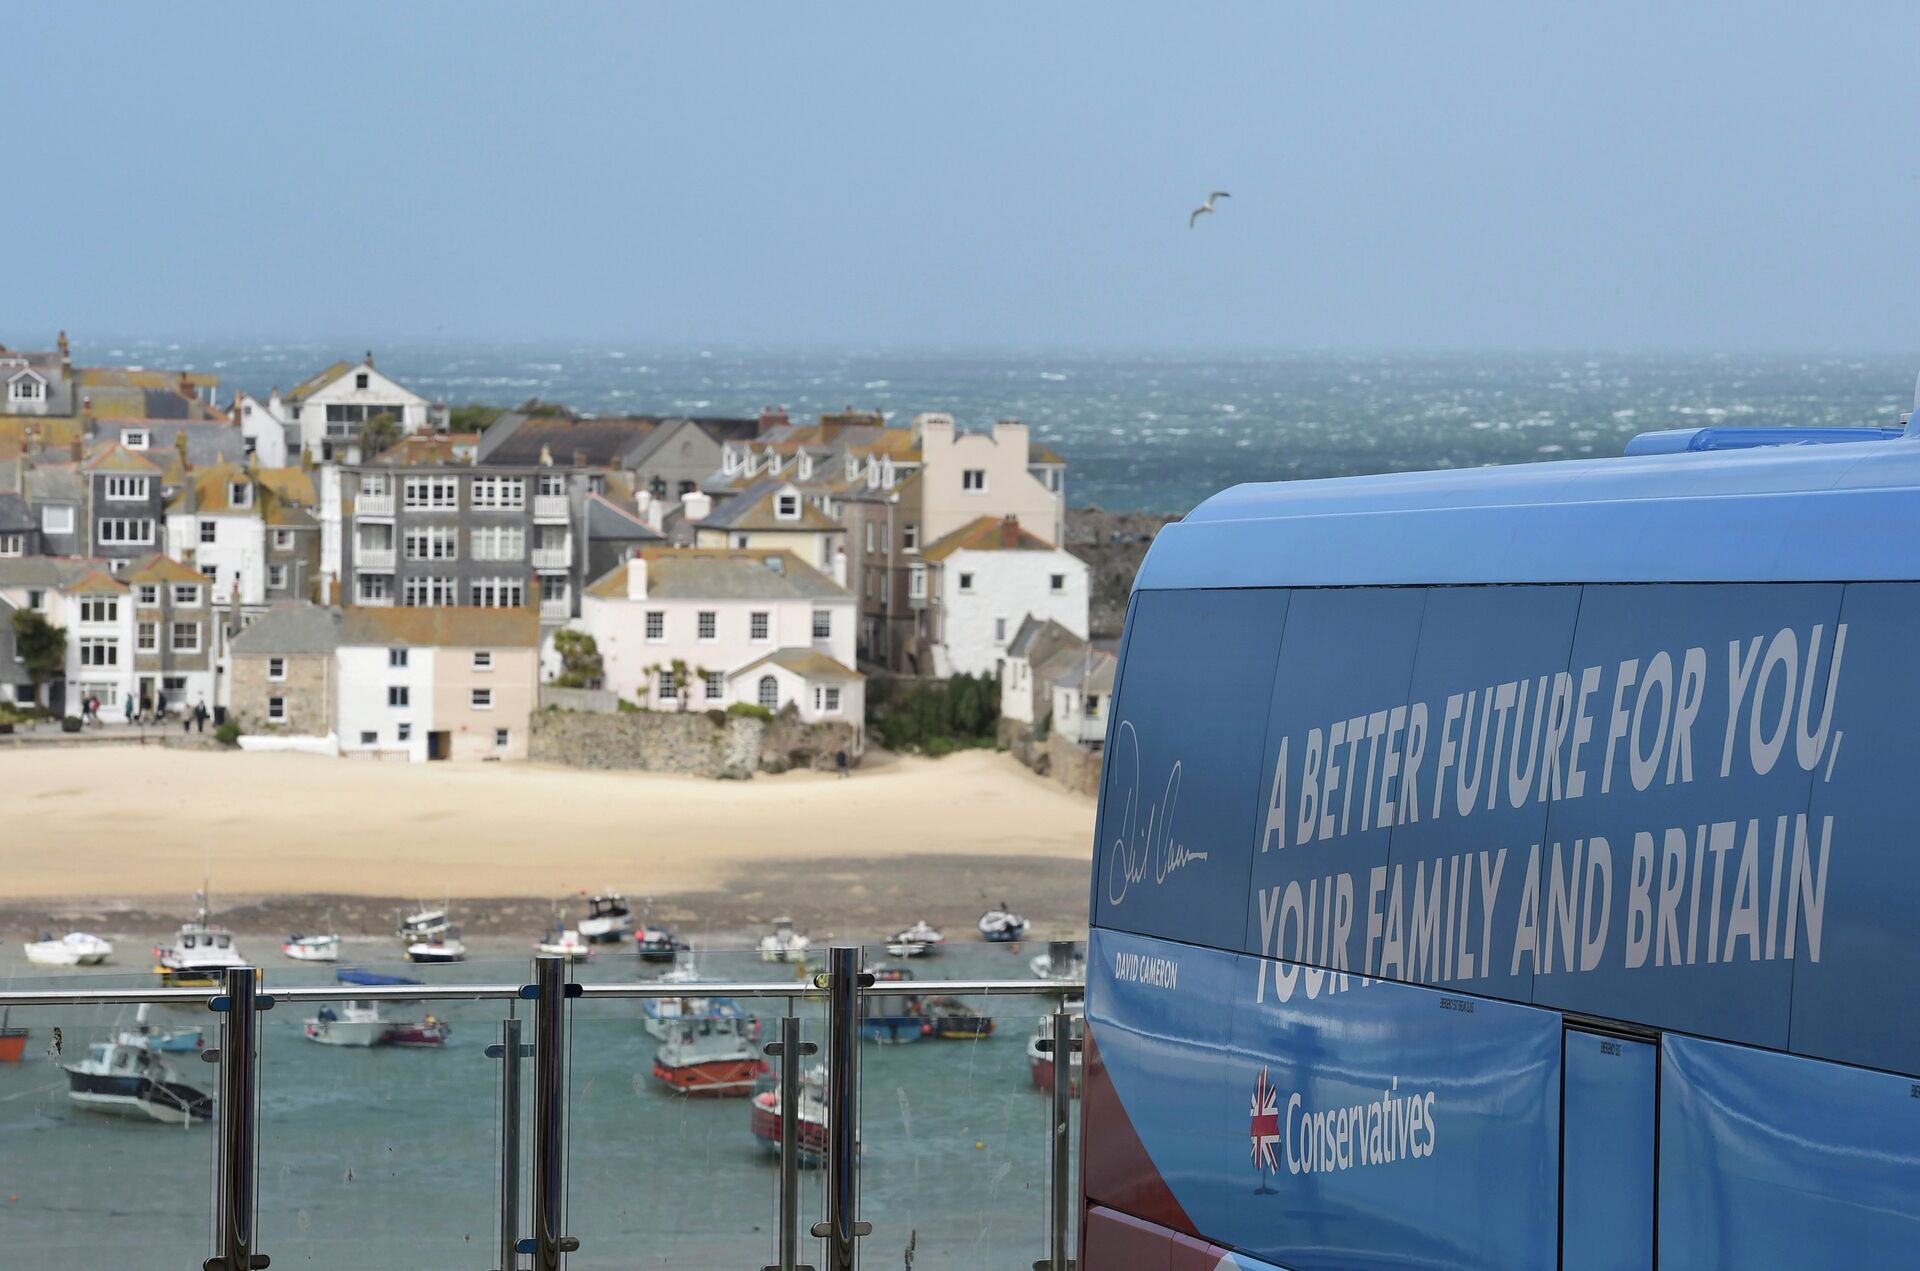 Conservative Party election campaign bus stands parked in St Ives, south-west England on May 5, 2015 - Sputnik International, 1920, 30.09.2021